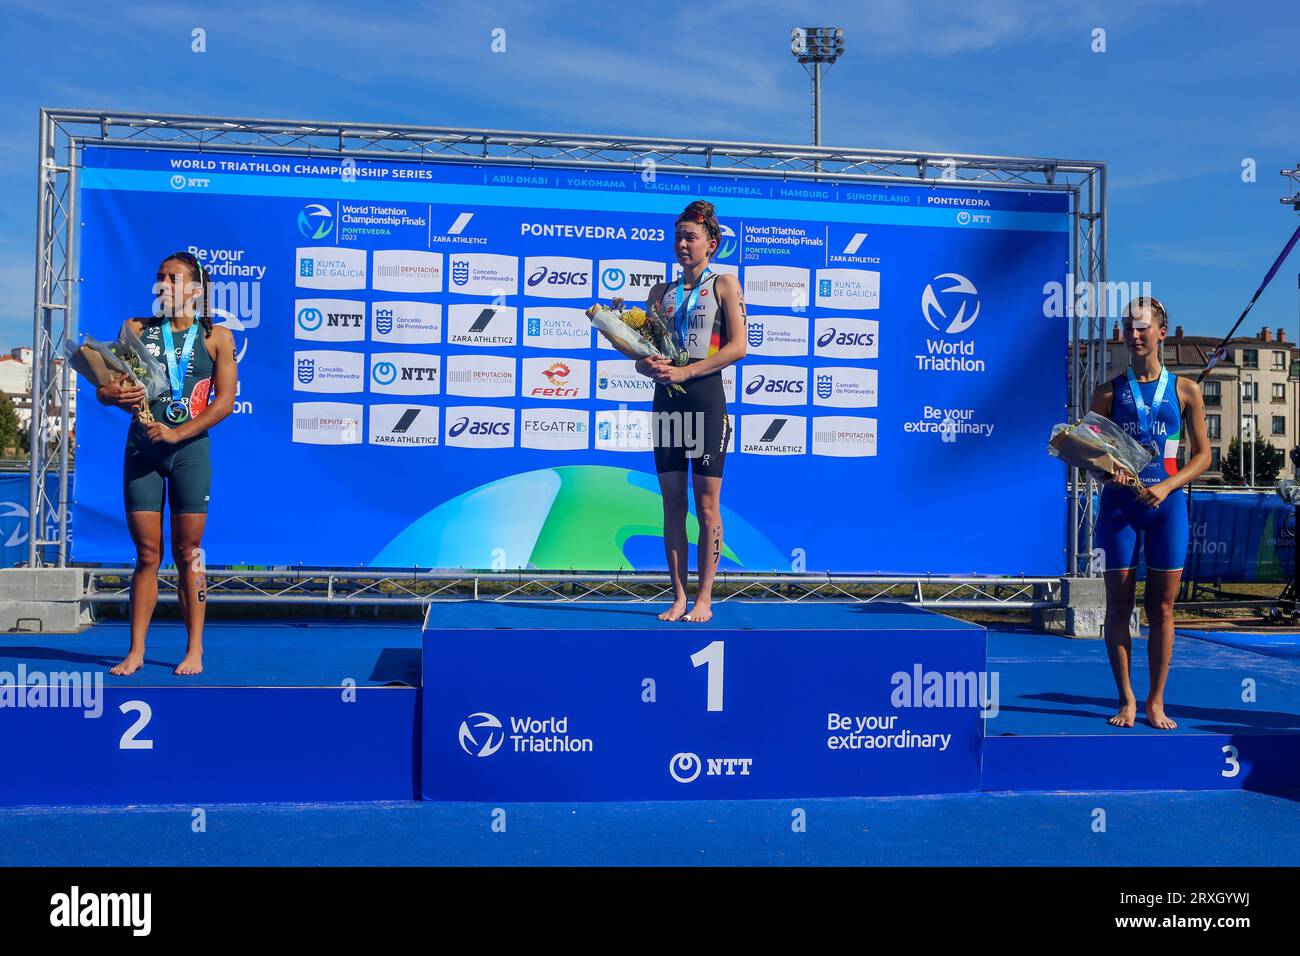 Pontevedra, Spain. 24th Sep, 2023. The final podium of the World Championship with the German triathlete, Selina Klamt, the Portuguese triathlete, Maria Tomé (L) and the Italian triathlete, Angelica Prestia (R) during the Triathlon World Championships 2023 Women's Sub23, on September 24, 2023, in Pontevedra, Spain. (Photo by Alberto Brevers/Pacific Press/Sipa USA) Credit: Sipa USA/Alamy Live News Stock Photo